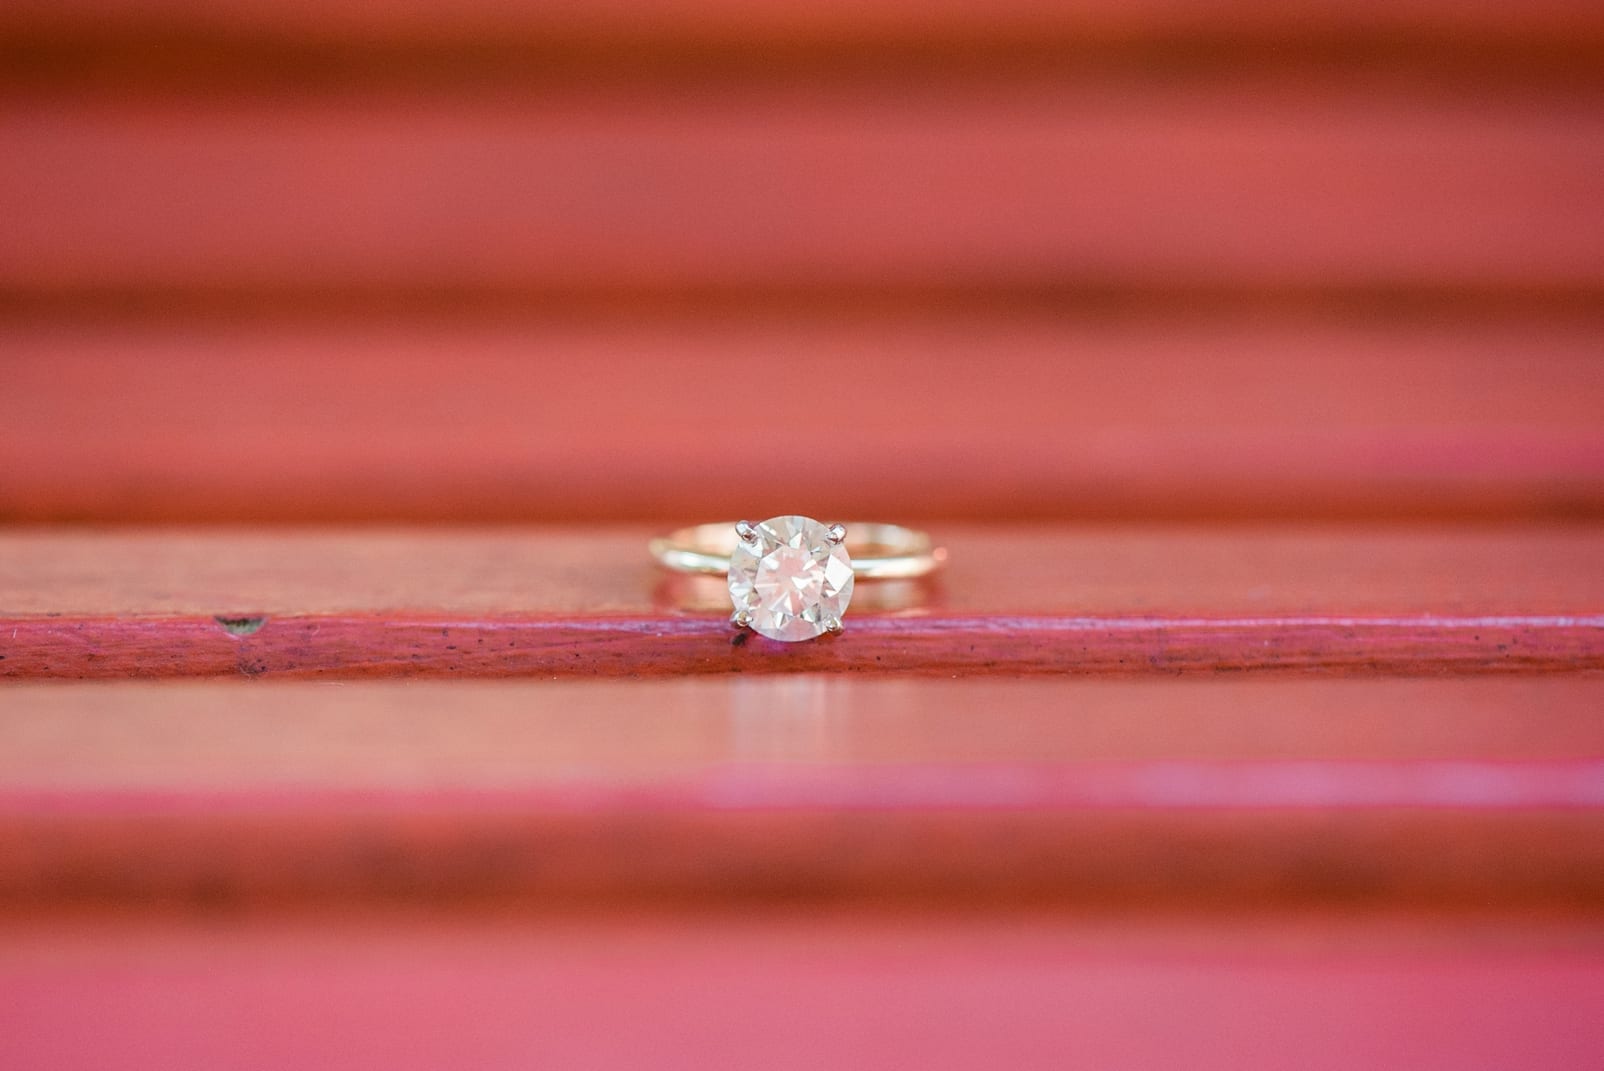 Raleigh engagement ring on red porch swing photo